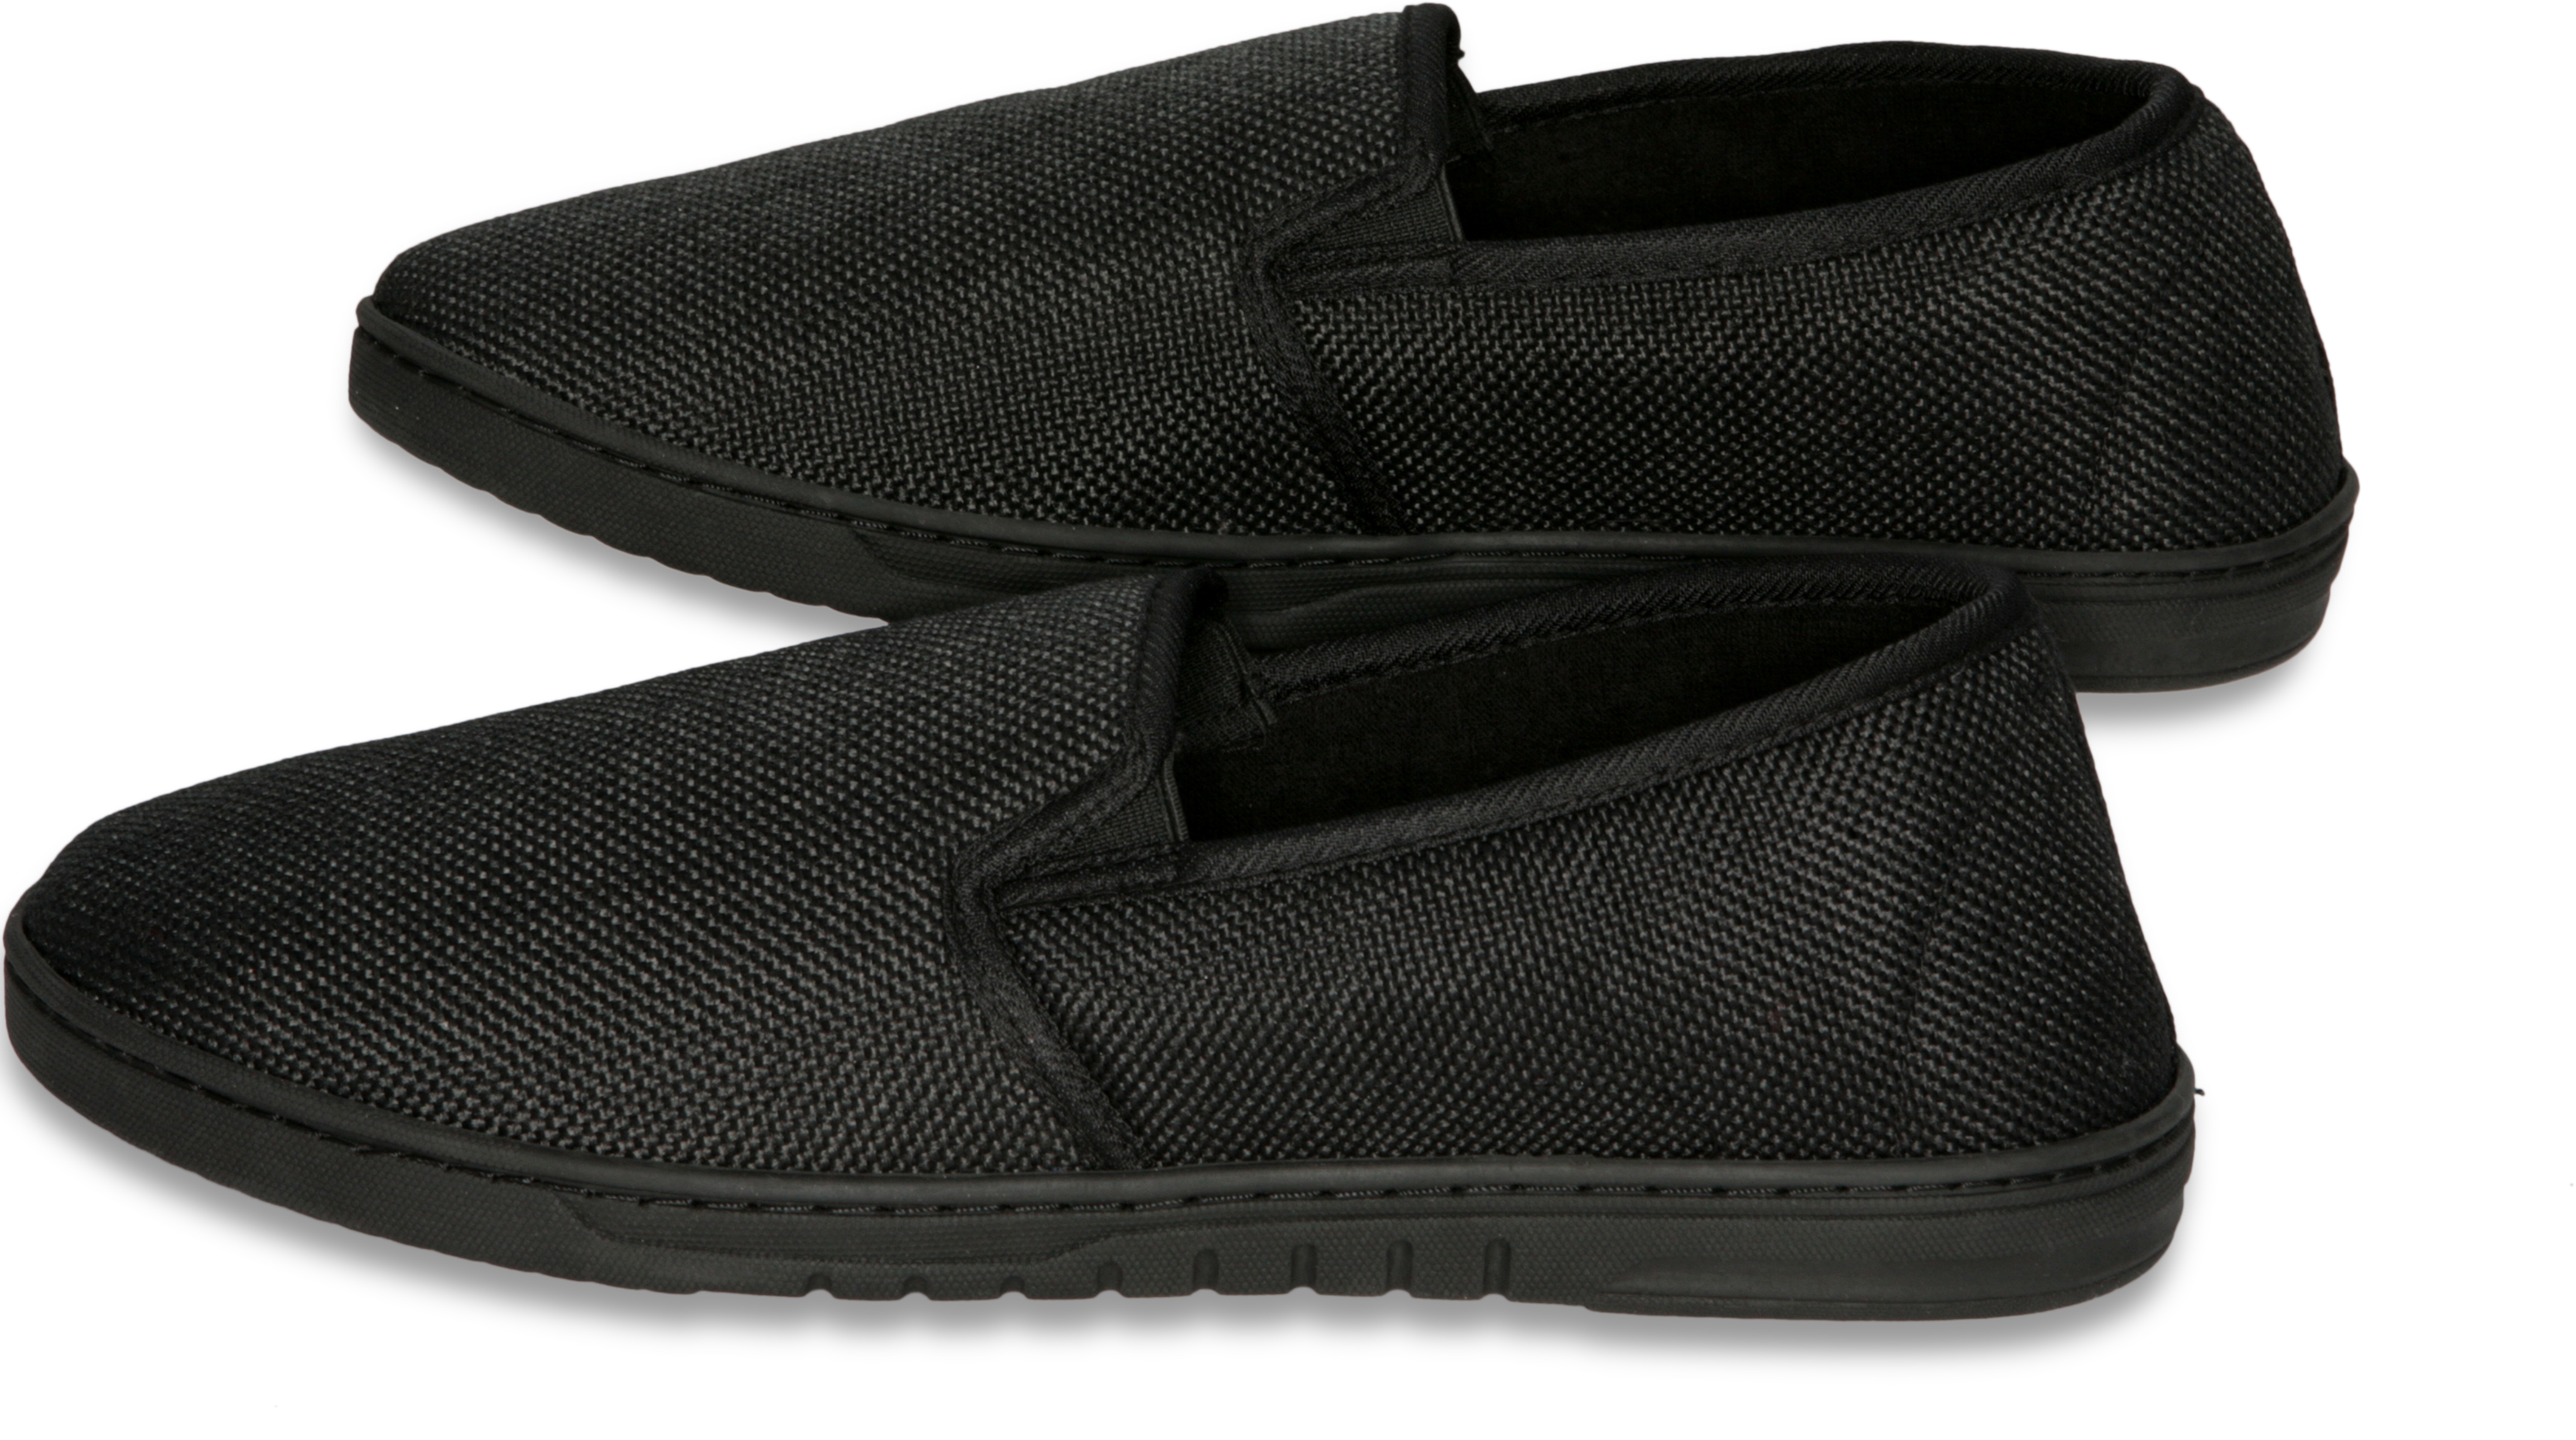 Deluxe Comfort Men's Memory Foam Slipper, Size 9-10 - Suede Vamp Checkered Lining - Memory Foam Insole - Strong TPR Outsole - Mens Slippers, Black - image 4 of 5